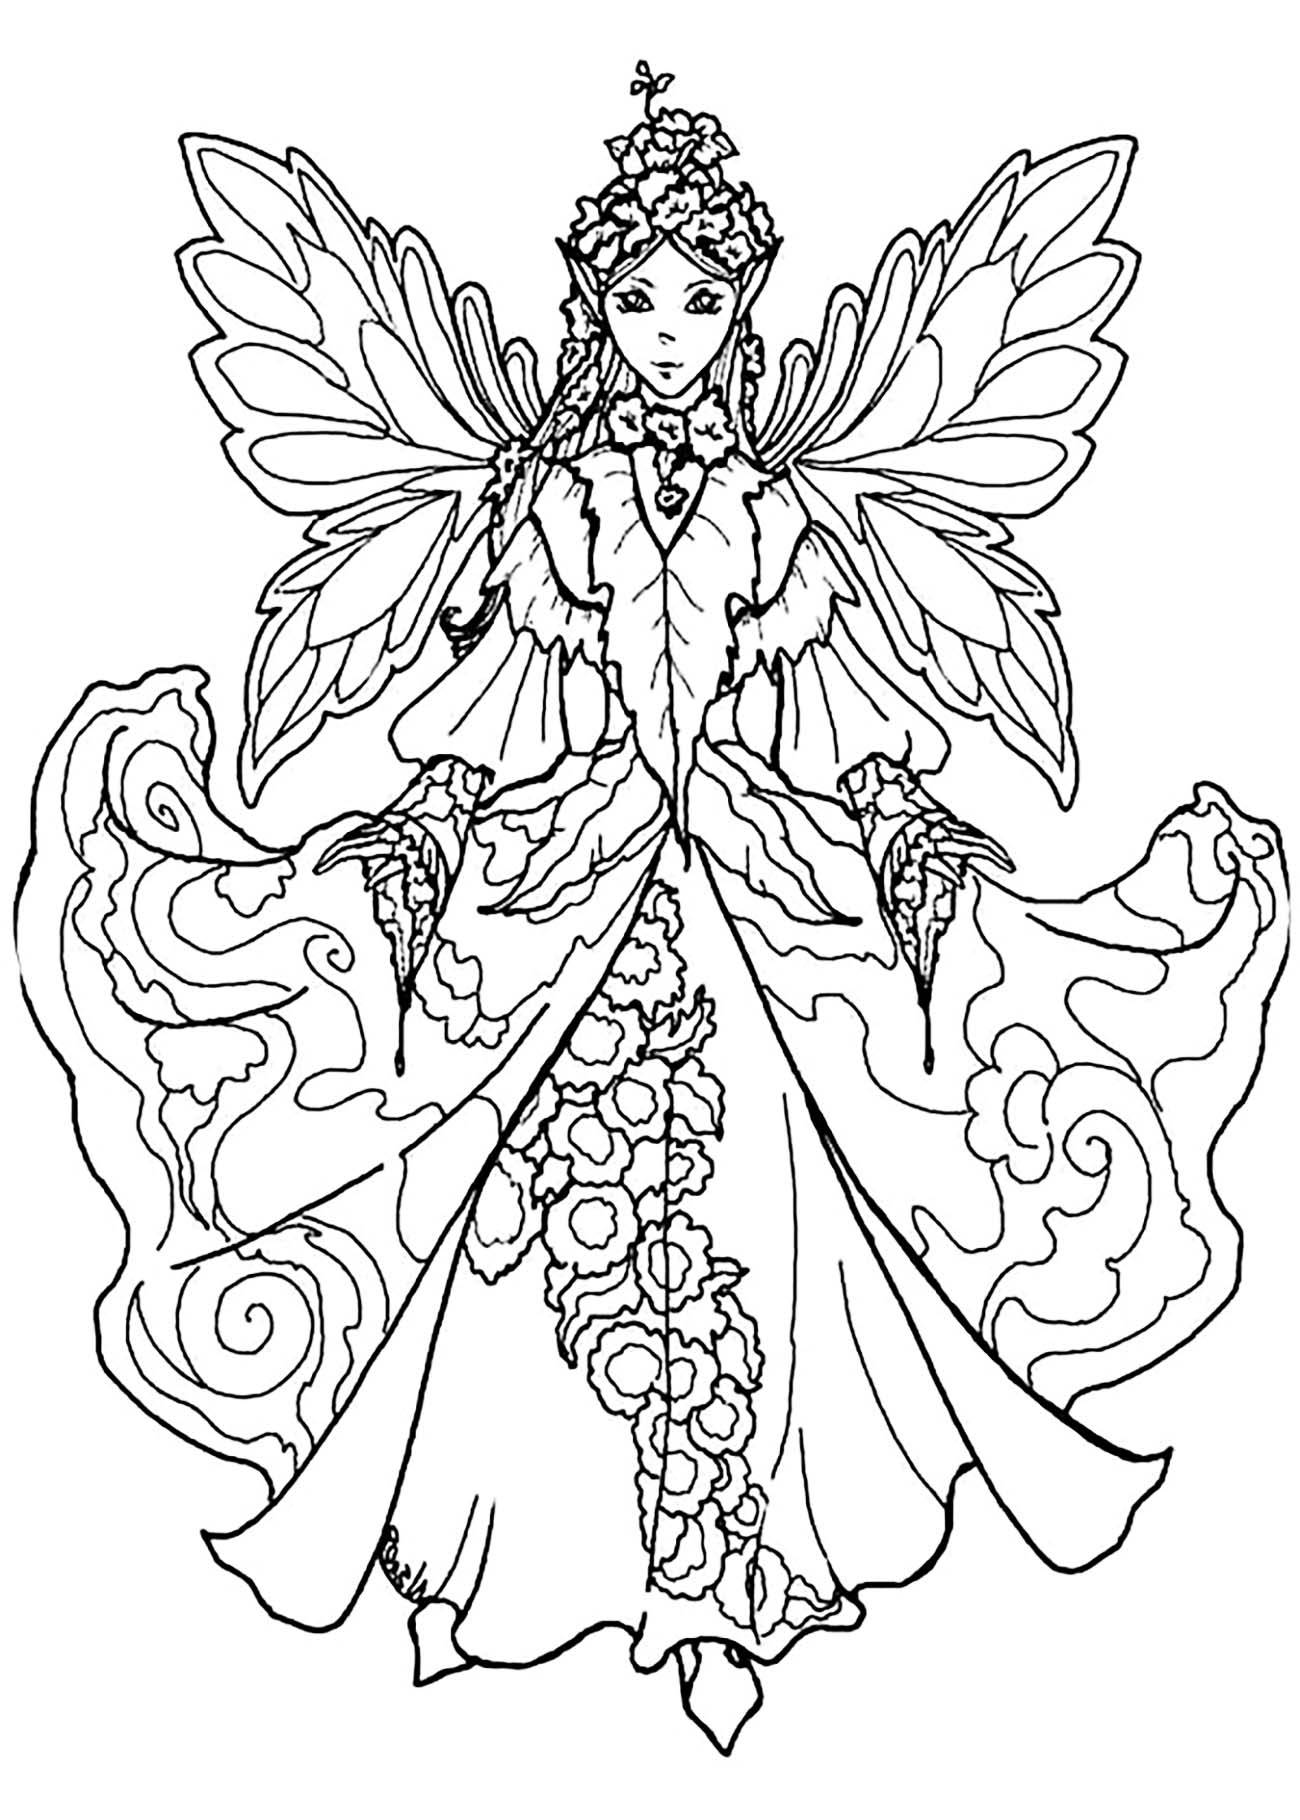 Coloring page fairy with impressive dress